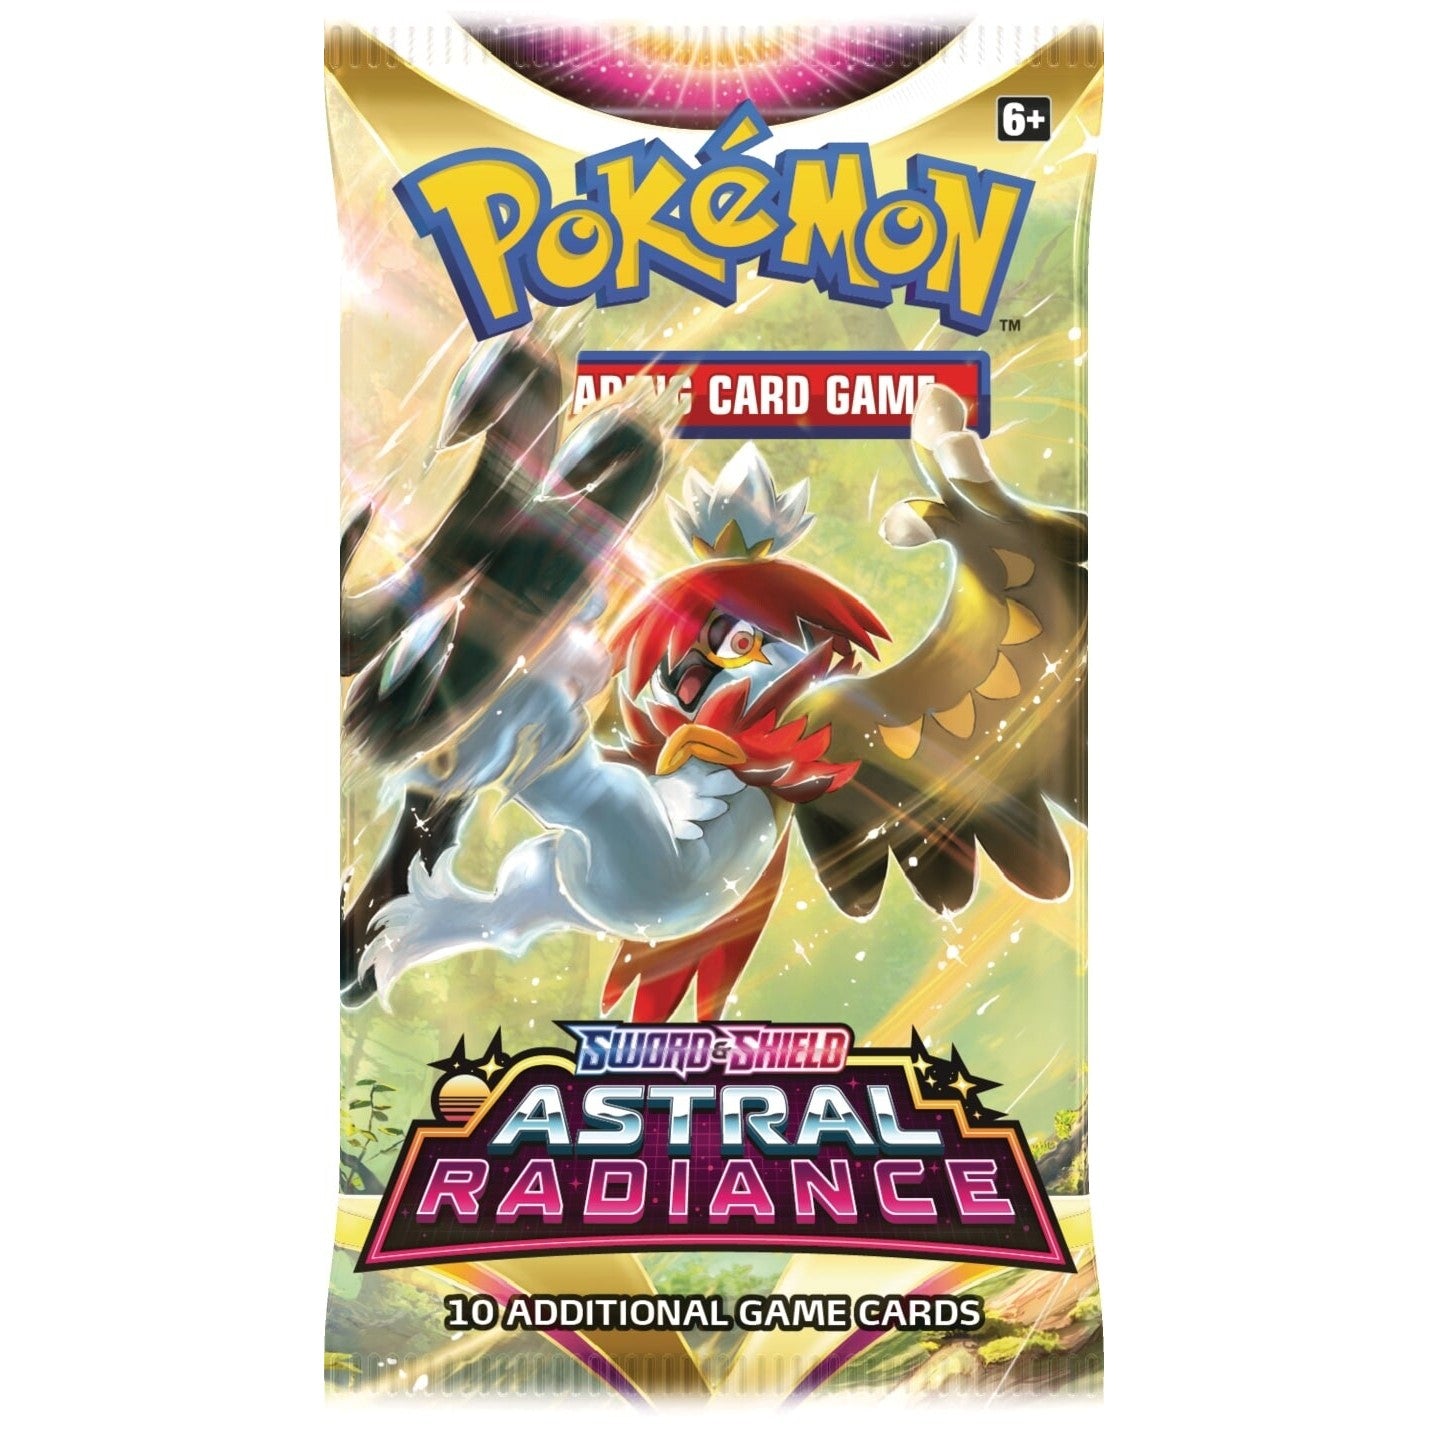 Pokemon Sword & Shield - Astral Radiance Booster Pack